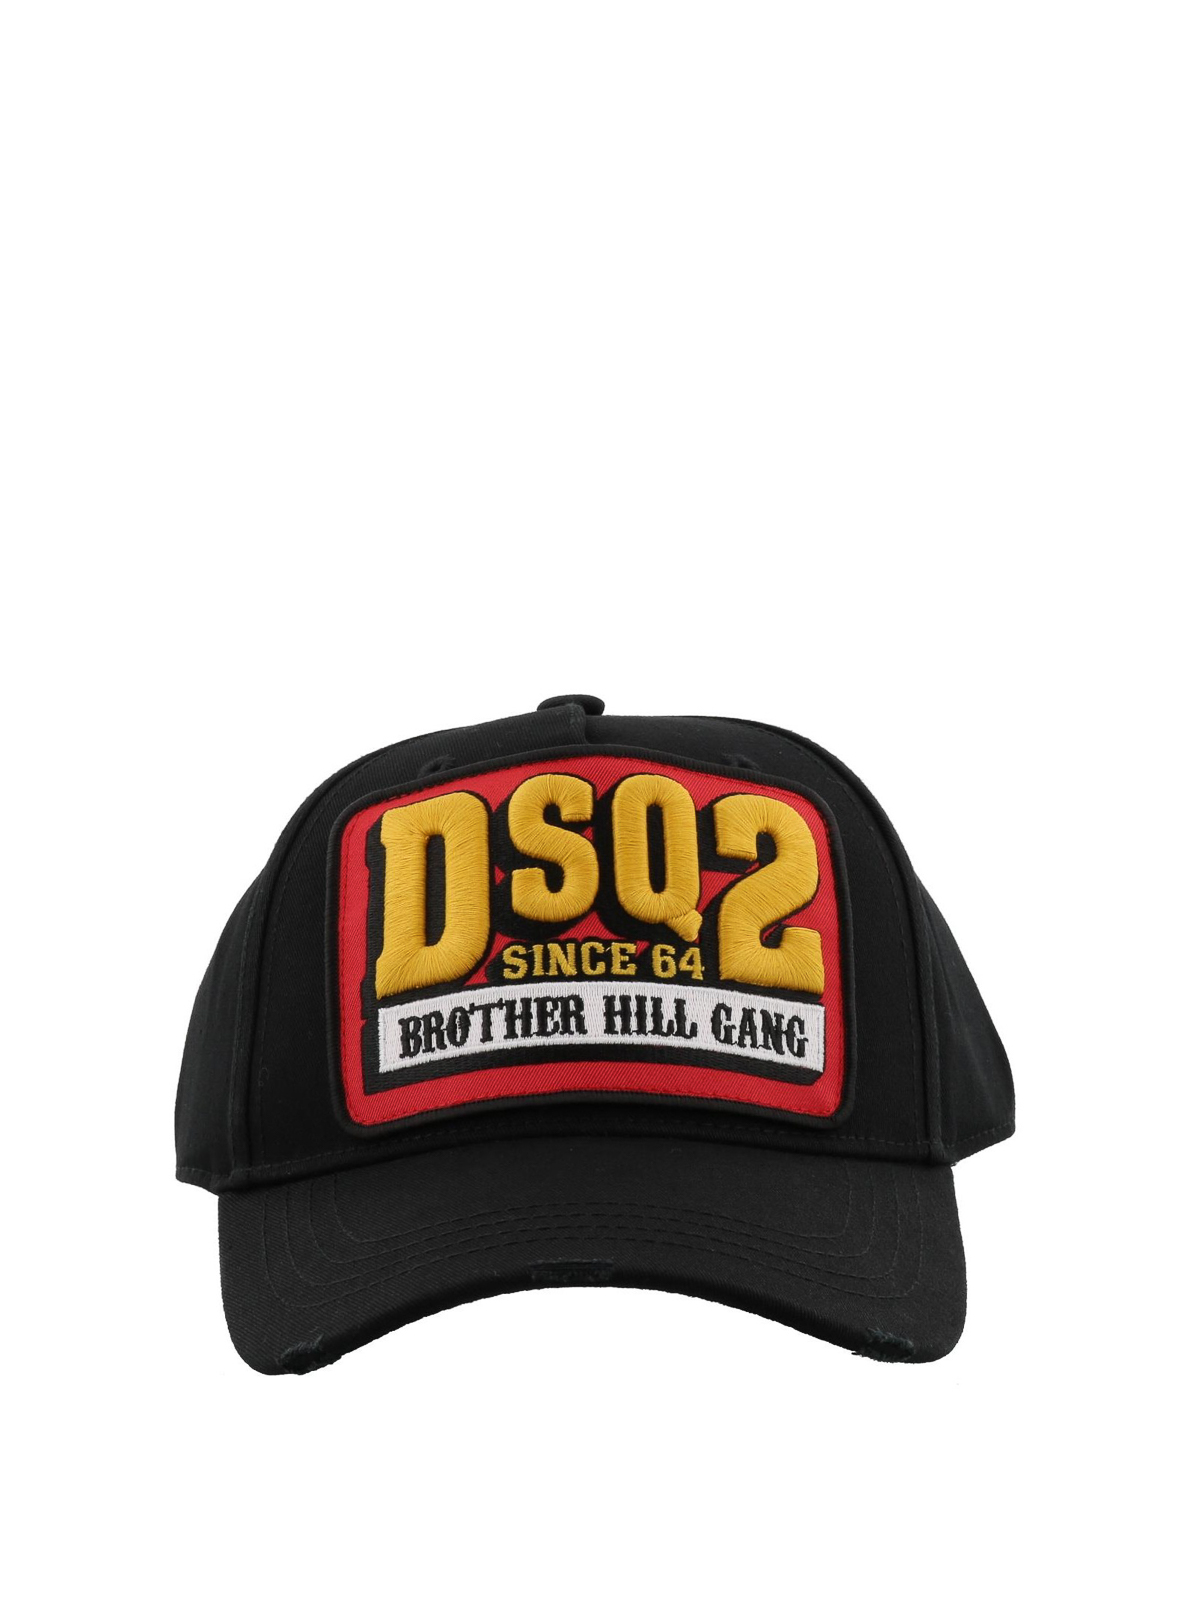 Dsquared2 - DSQ2 Brother Hill Gang 